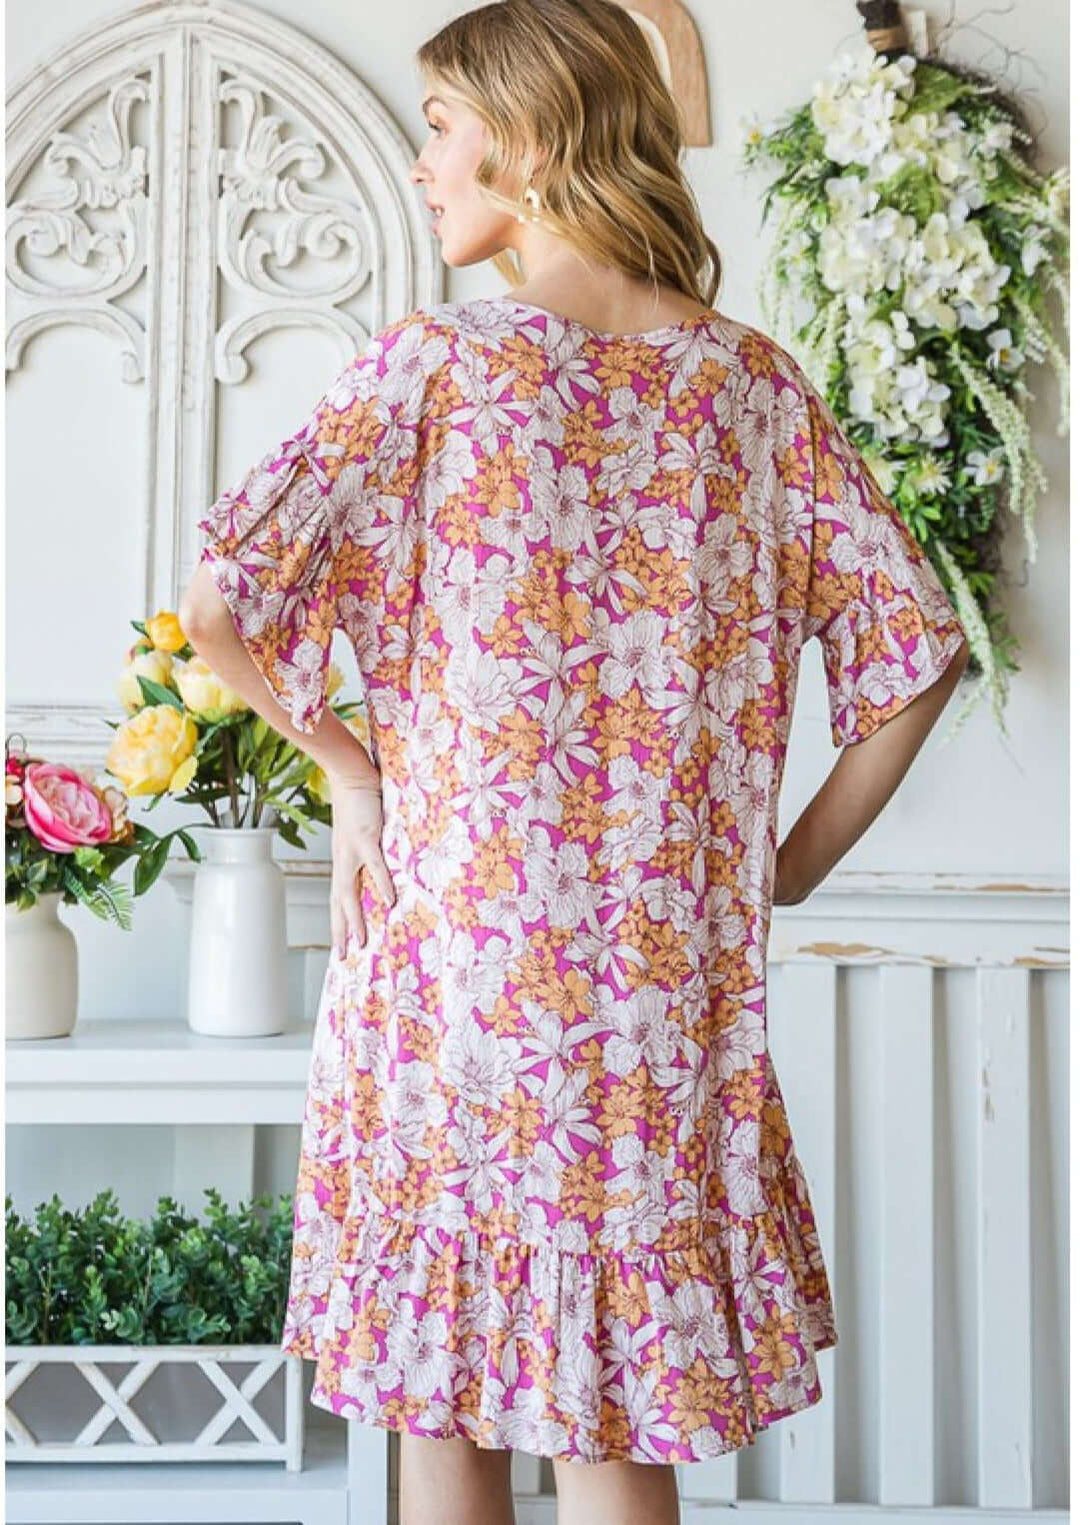 Ladies Made in USA 100% Rayon V-Neck Floral Tunic Dress with Flounce Ruffle Hem | Classy Cozy Cool Made in America Women's Boutique